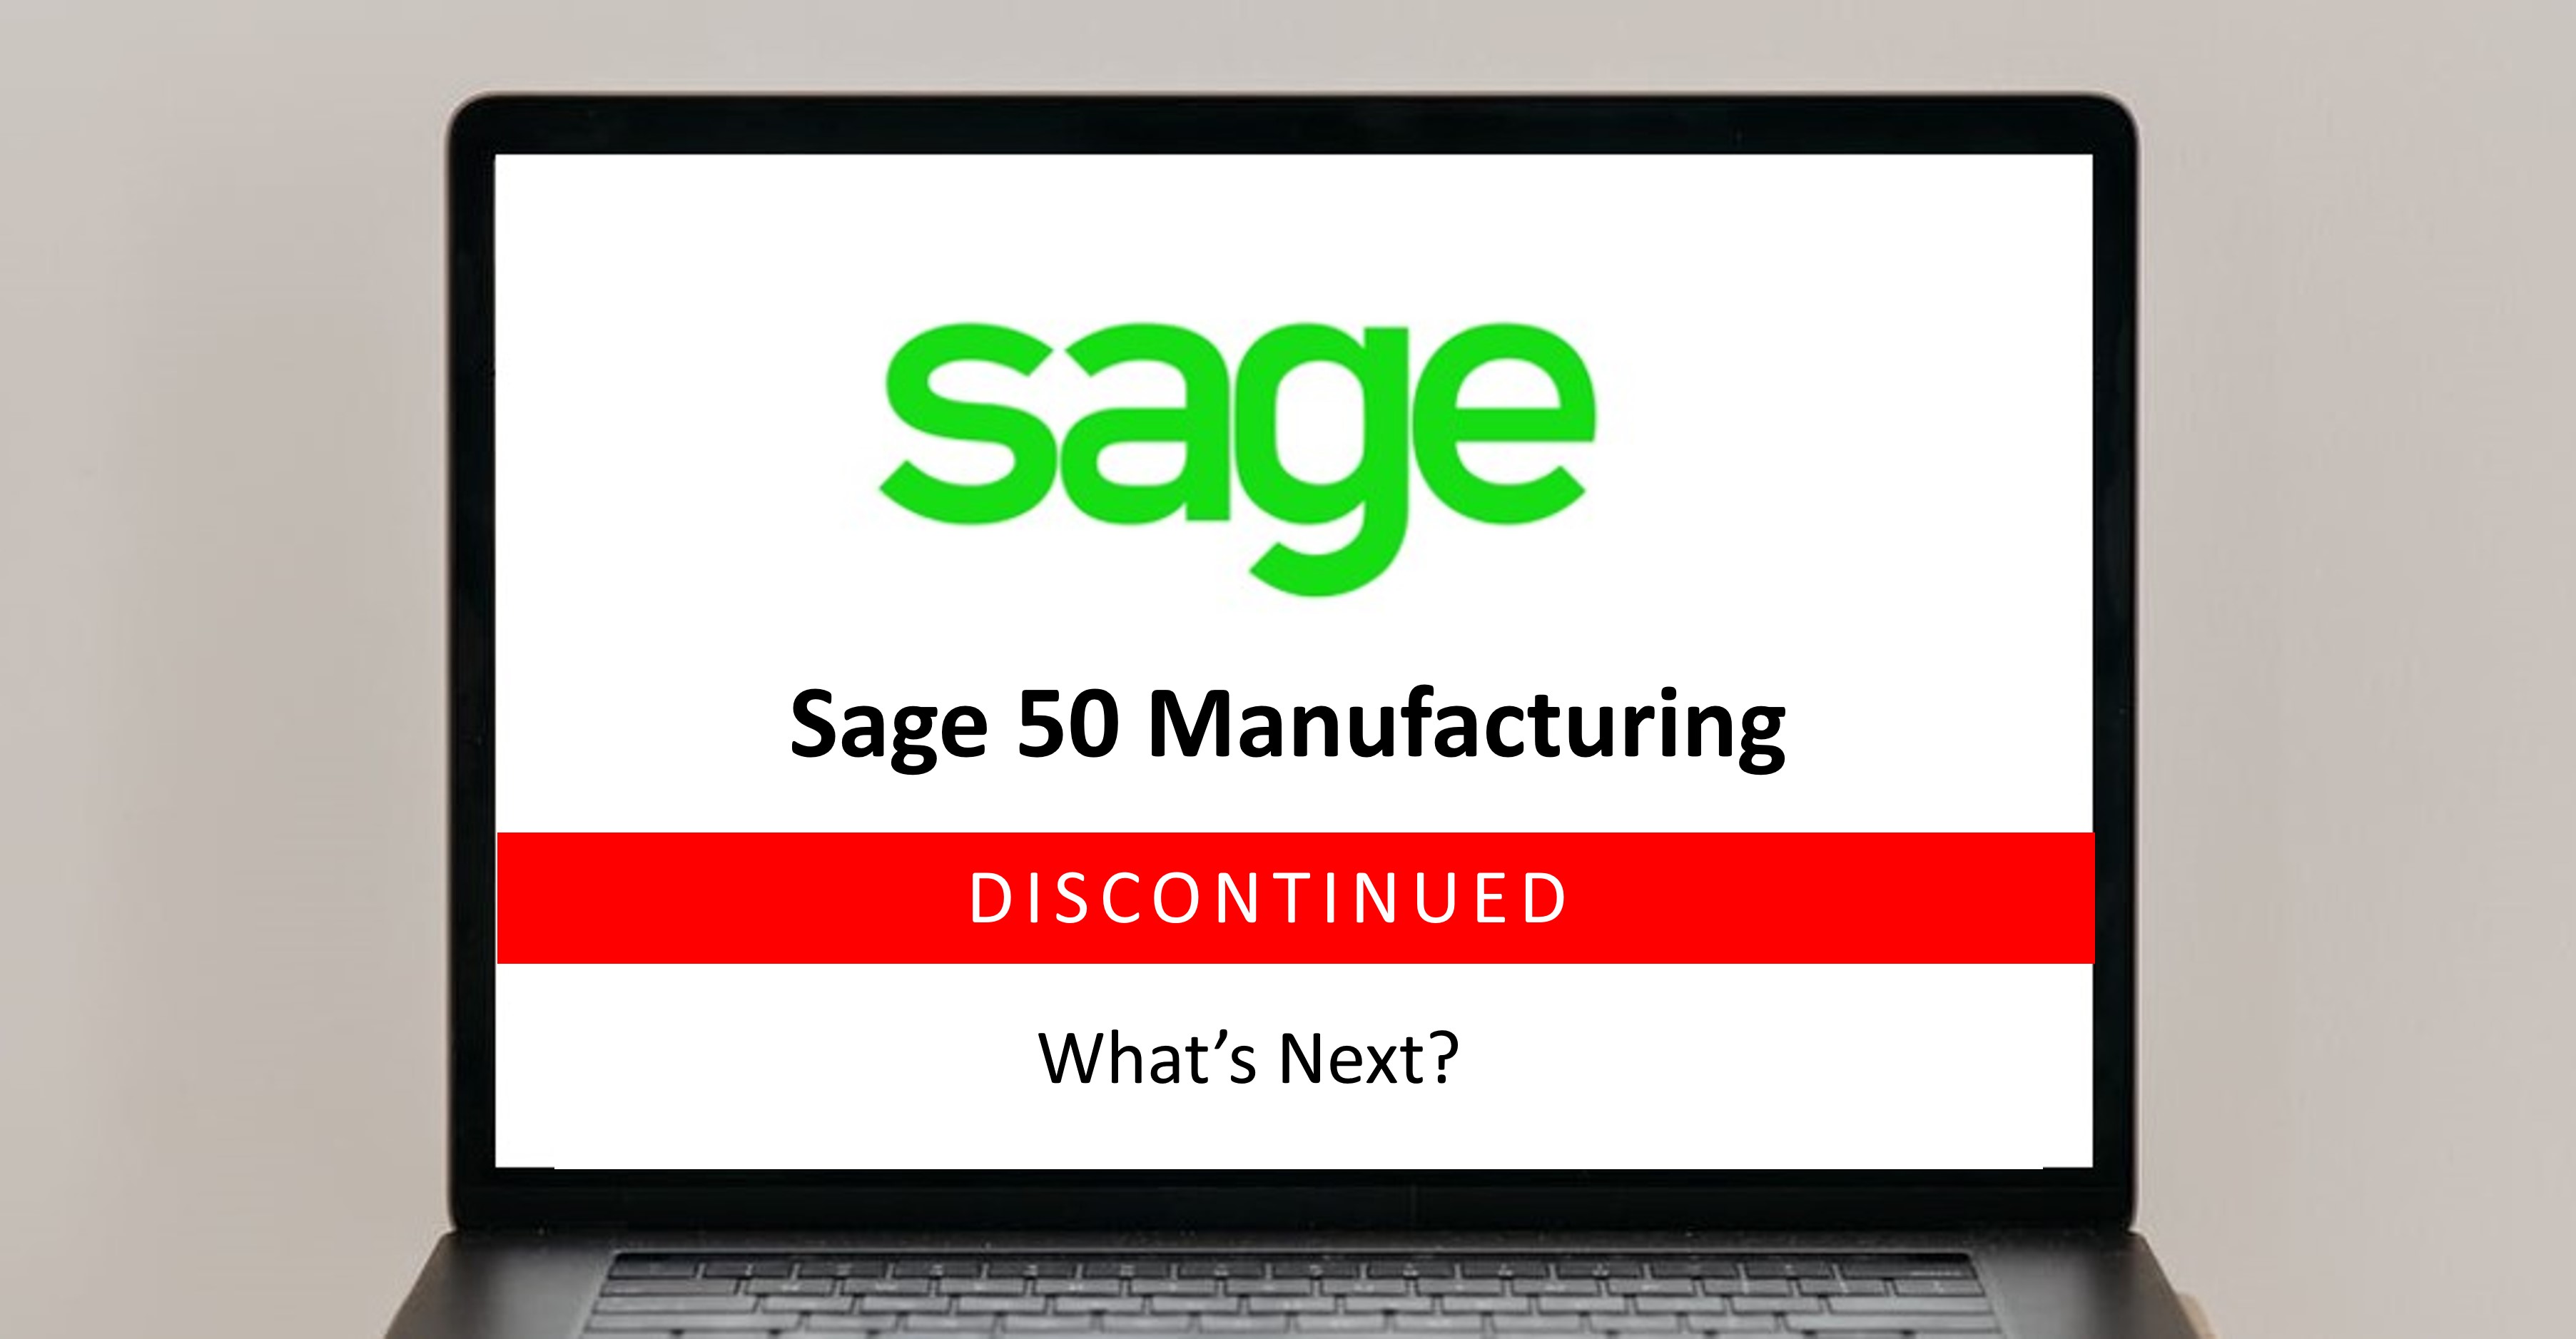 Sage 50 Manufacturing Discontinued - What Next?